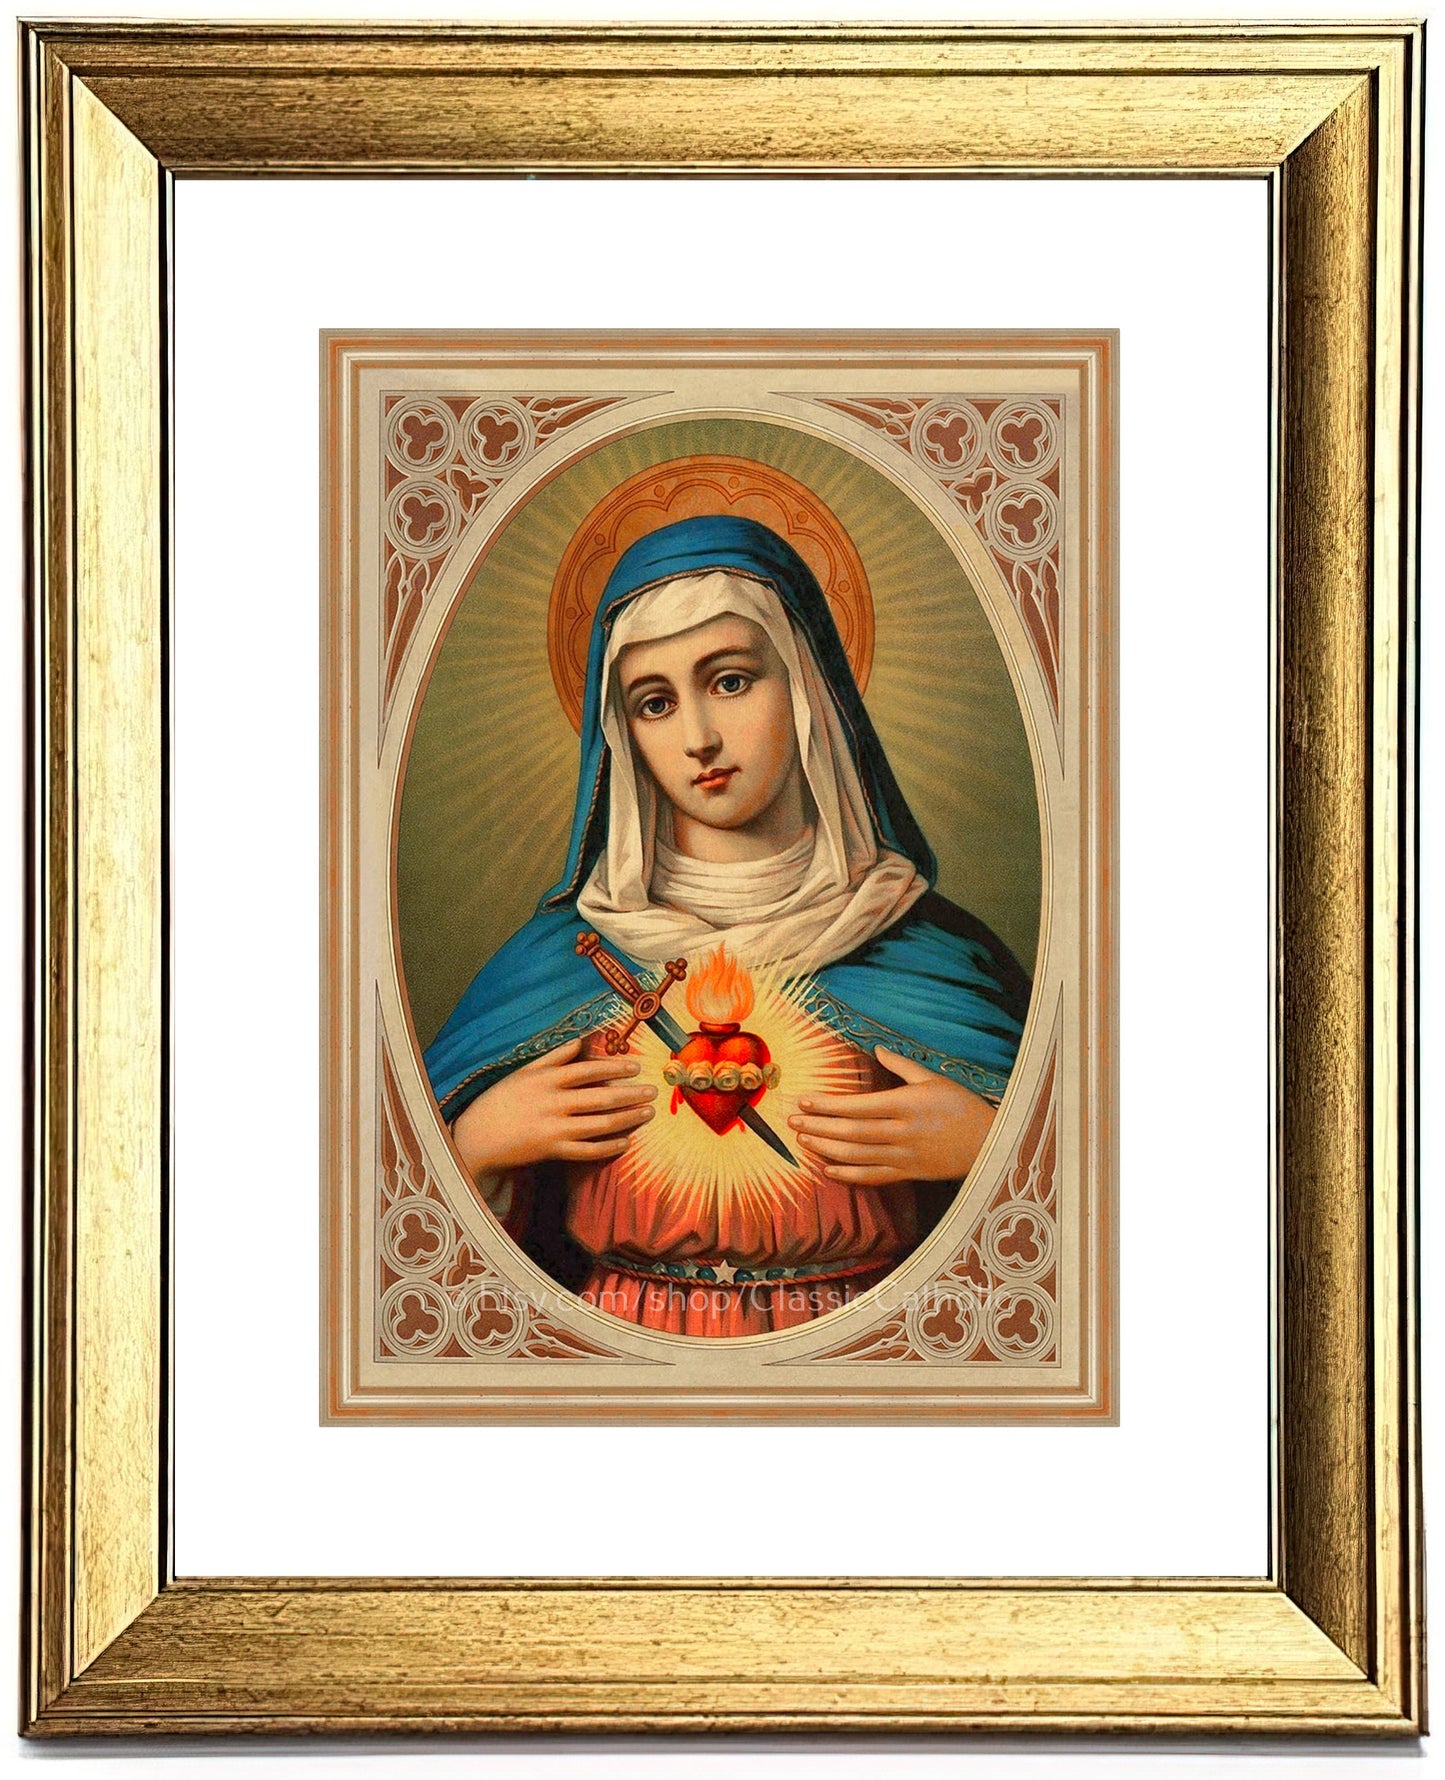 Immaculate Heart of Mary – Vintage Catholic Art Print – Archival Quality